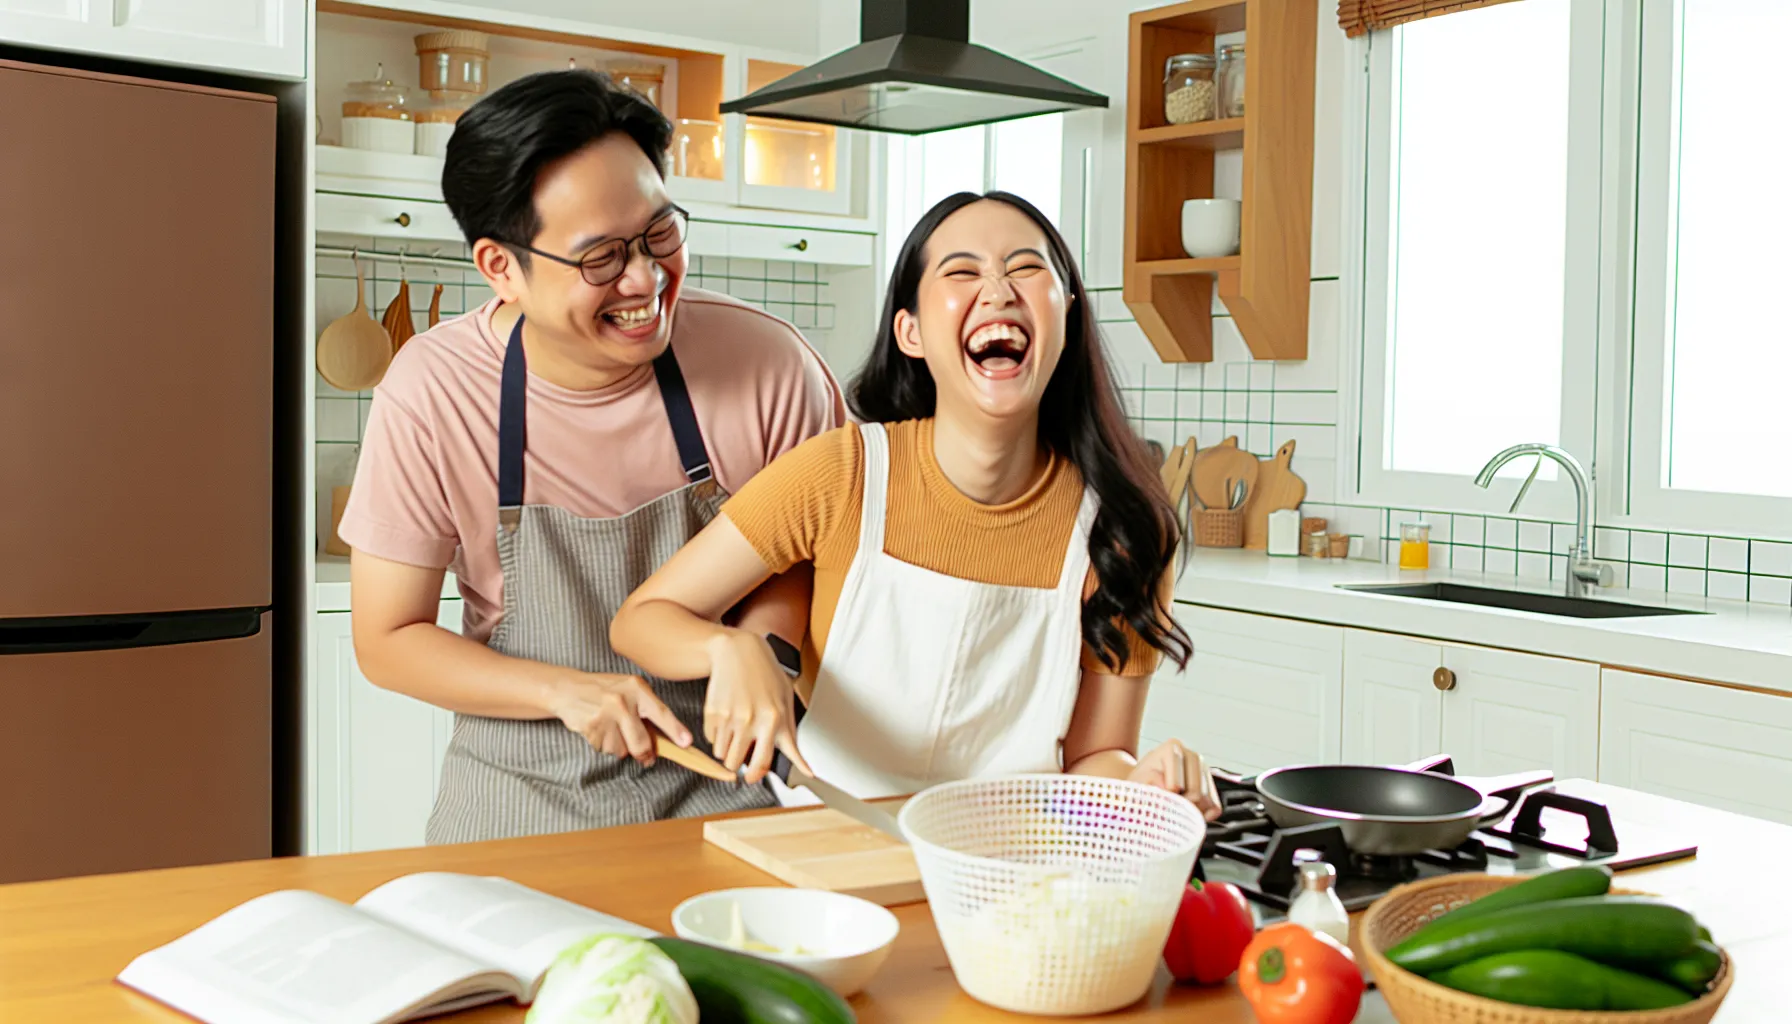 Couple cooking together, showcasing teamwork and joy